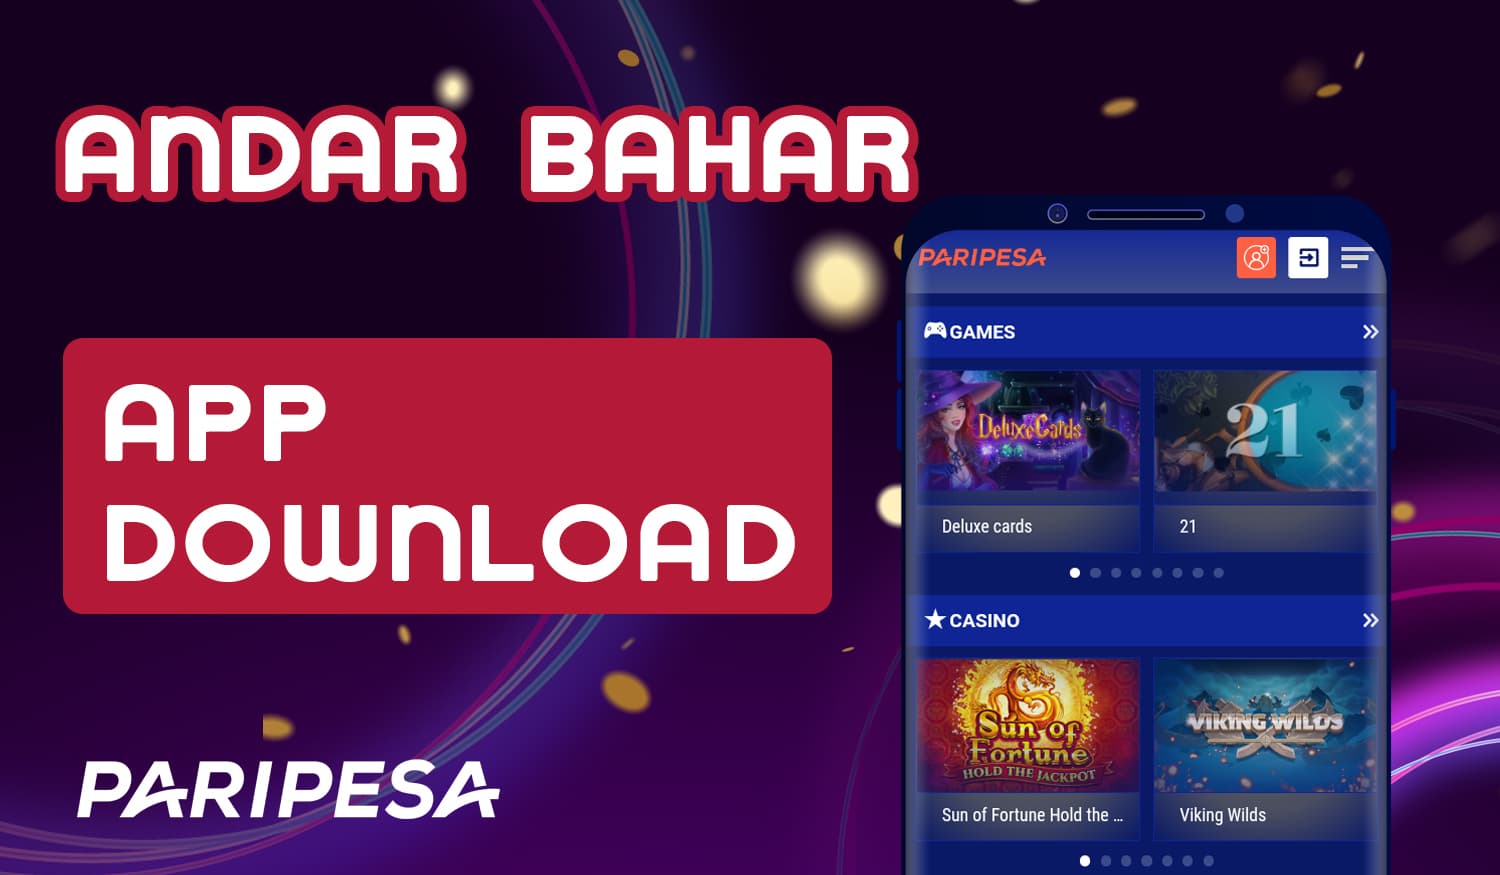 How to start playing andar bahar with PariPesa Casino mobile application in India